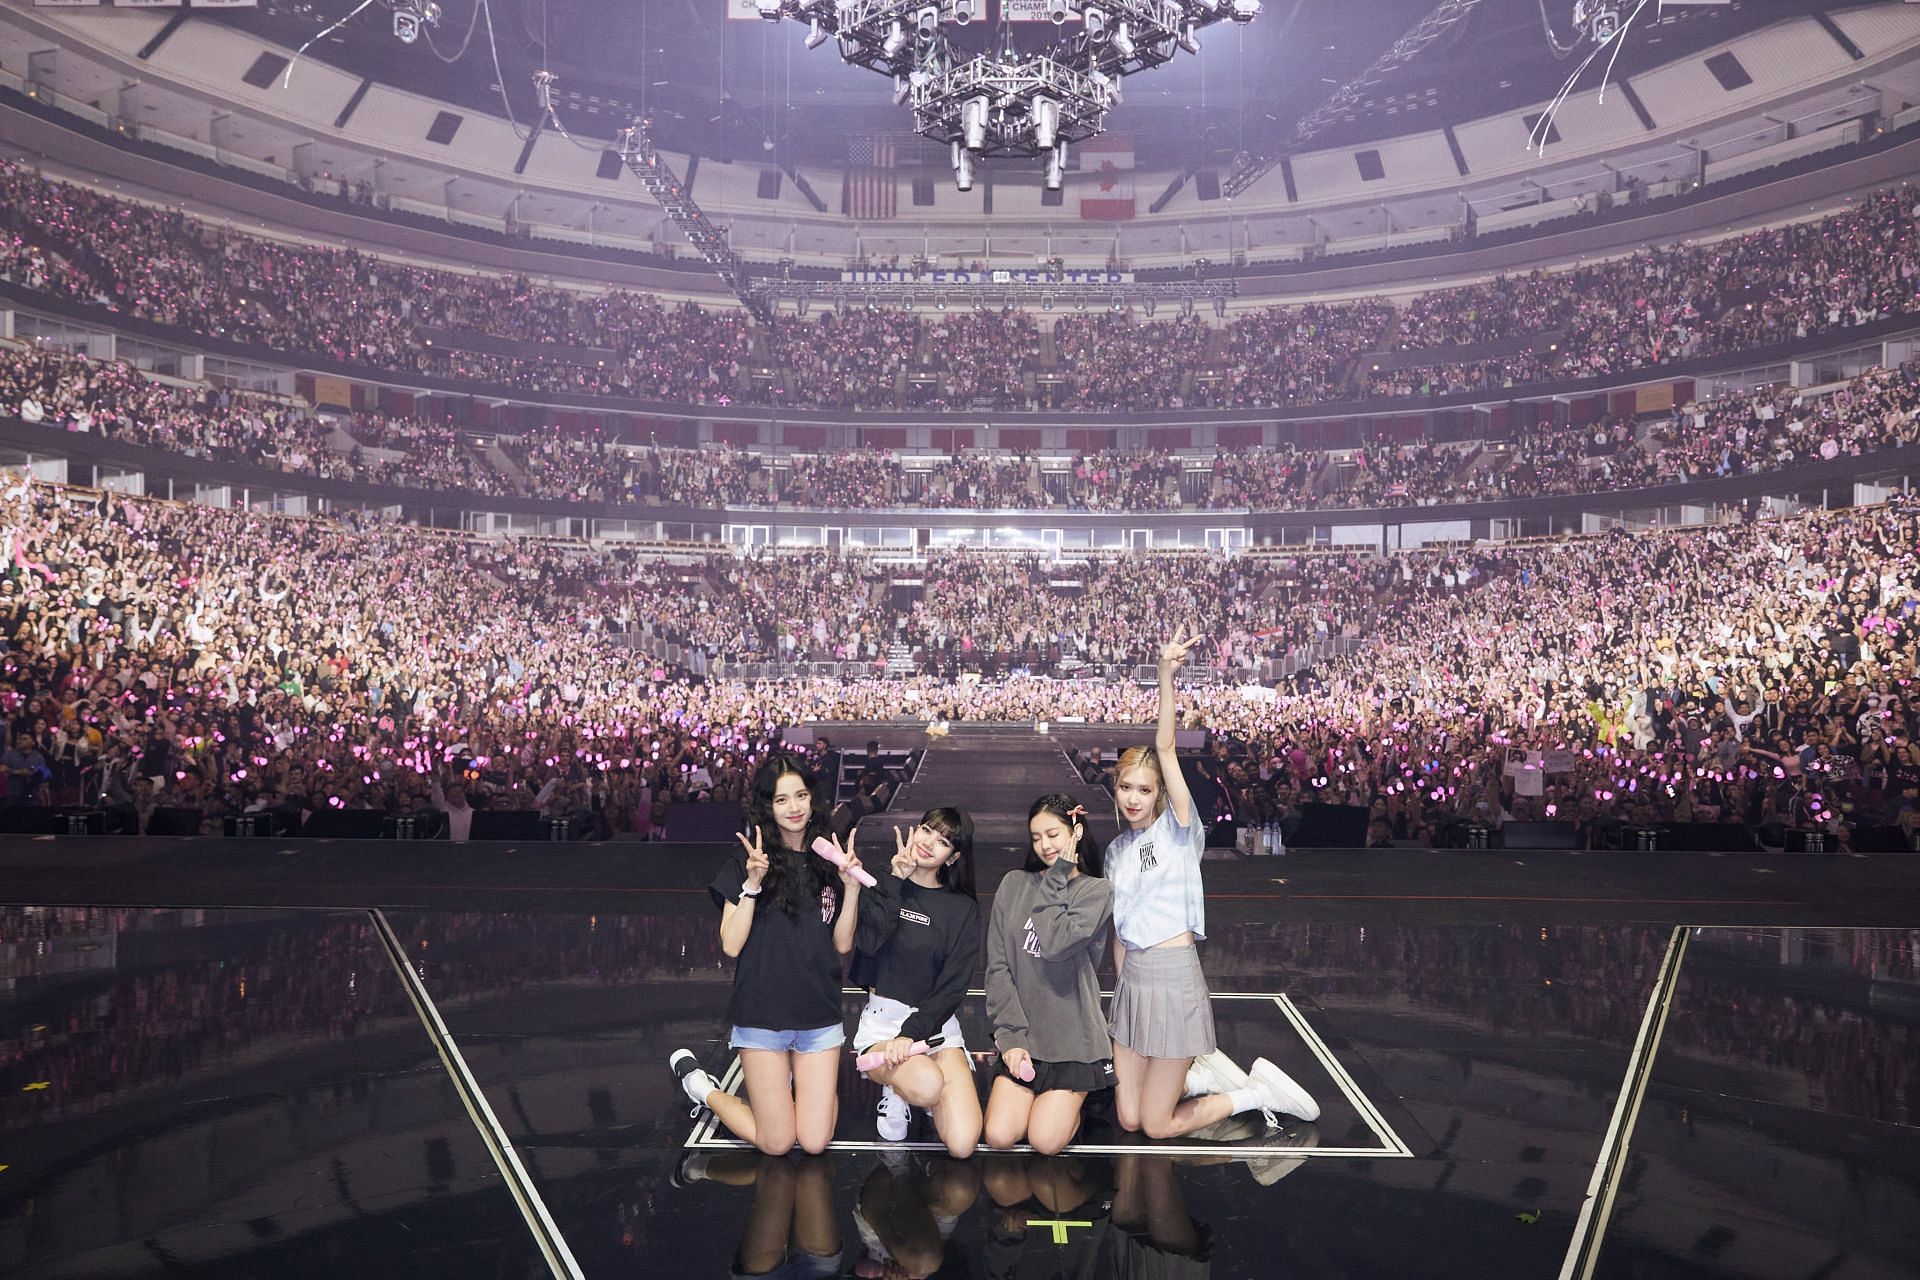 BLACKPINK poses with the audience after their Born Pink concert at Chicago. (Image via Twitter/ @BLACKPINK)